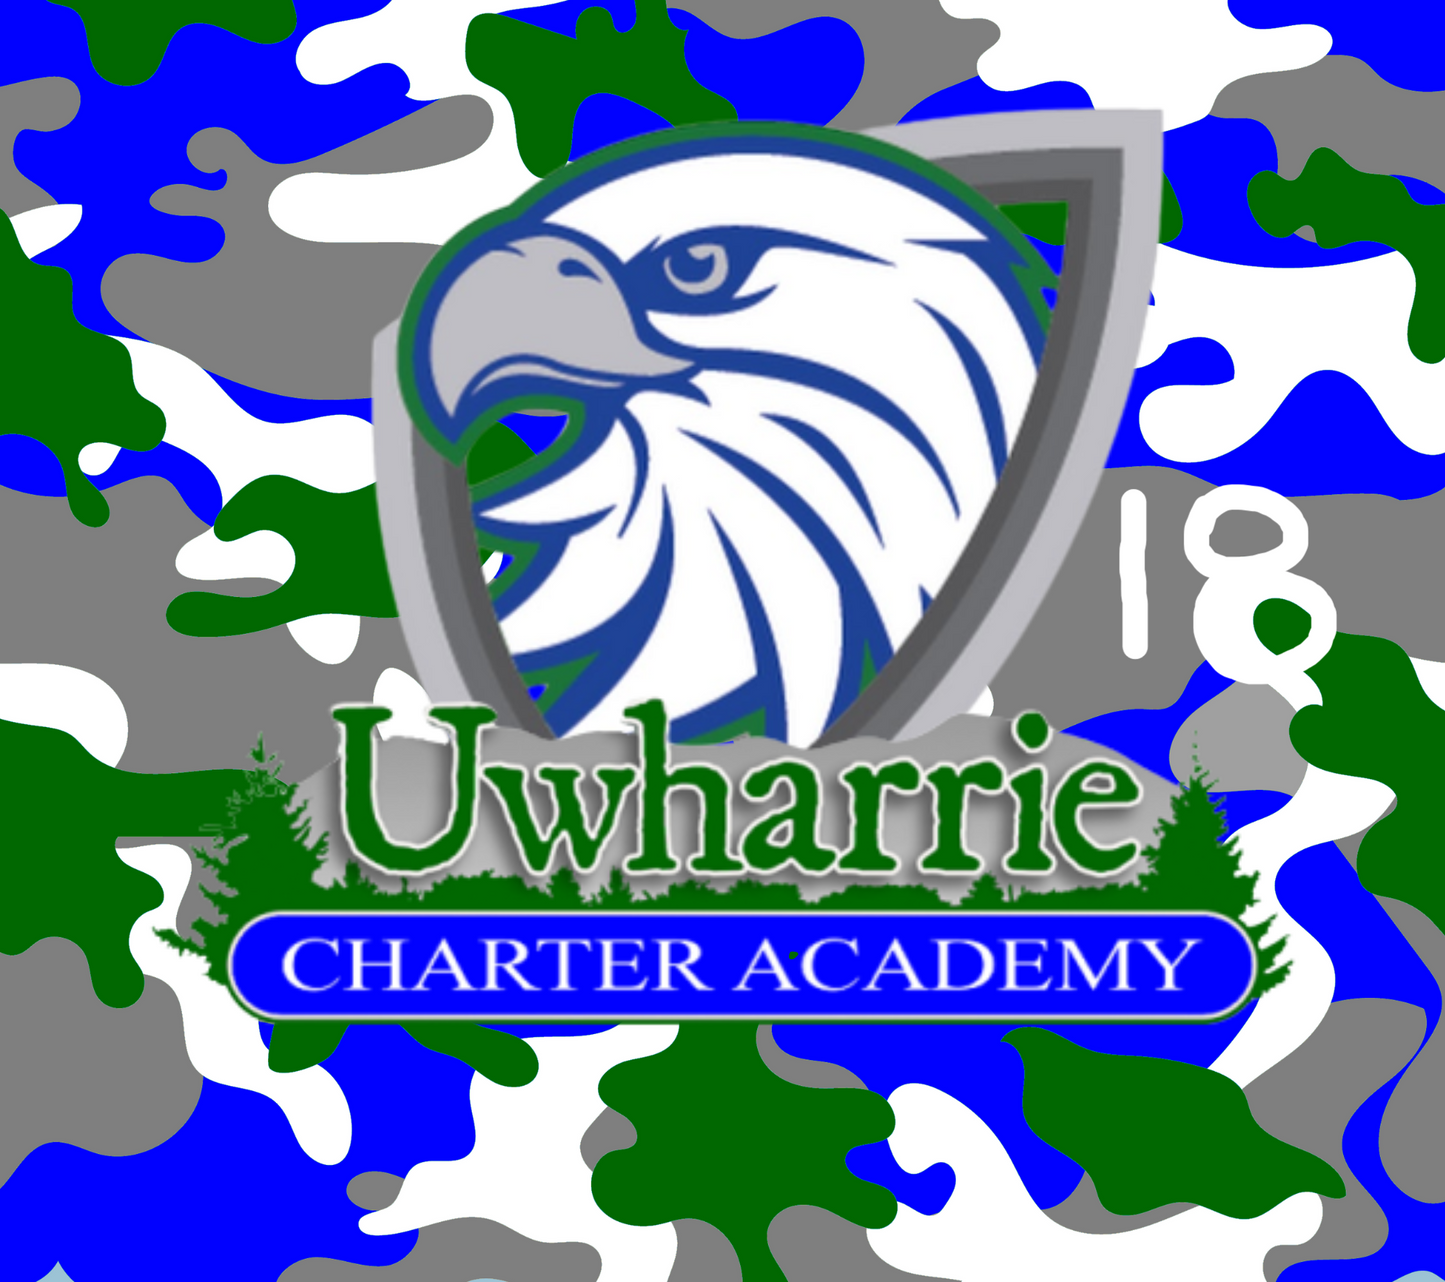 UWHARRIE CHARTER SPORTS PRODUCTS